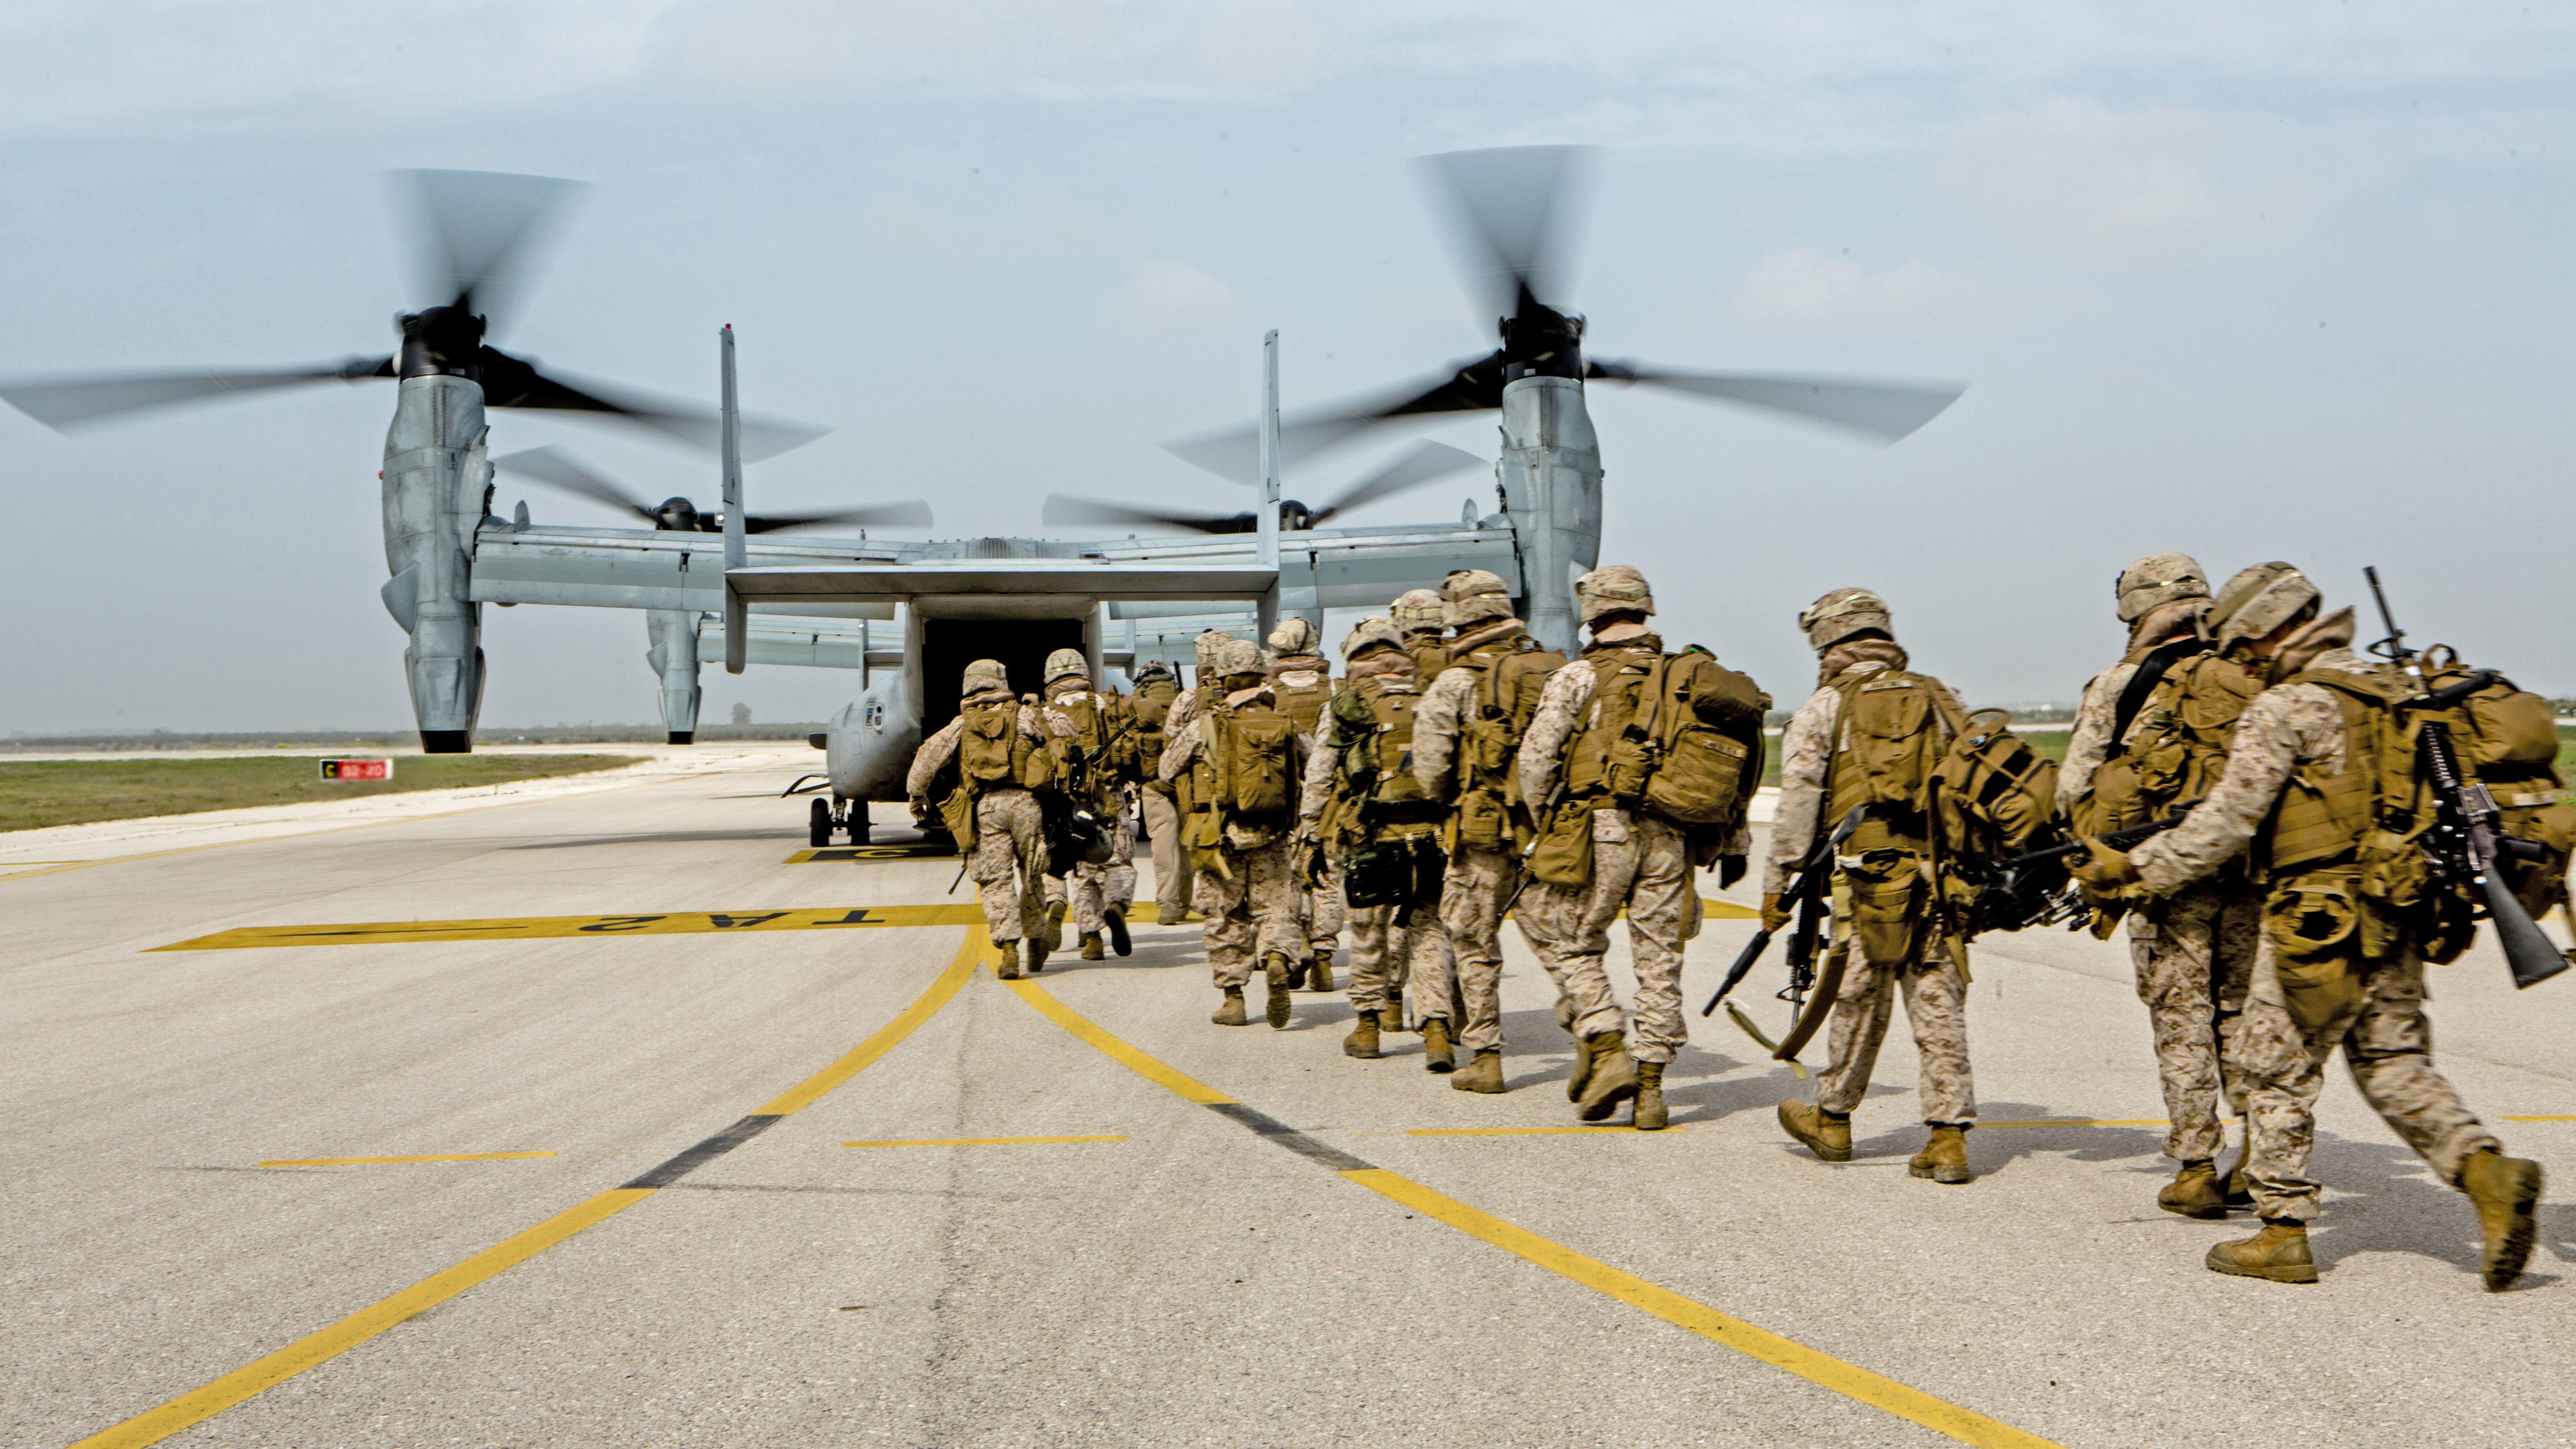 U.S. Marines with Special-Purpose Marine Air-Ground Task Force Crisis Response-Africa board an MV-22 Osprey during an alert force drill on Moron Air Base, Spain, March 13, 2015. US Marine Corps photo.